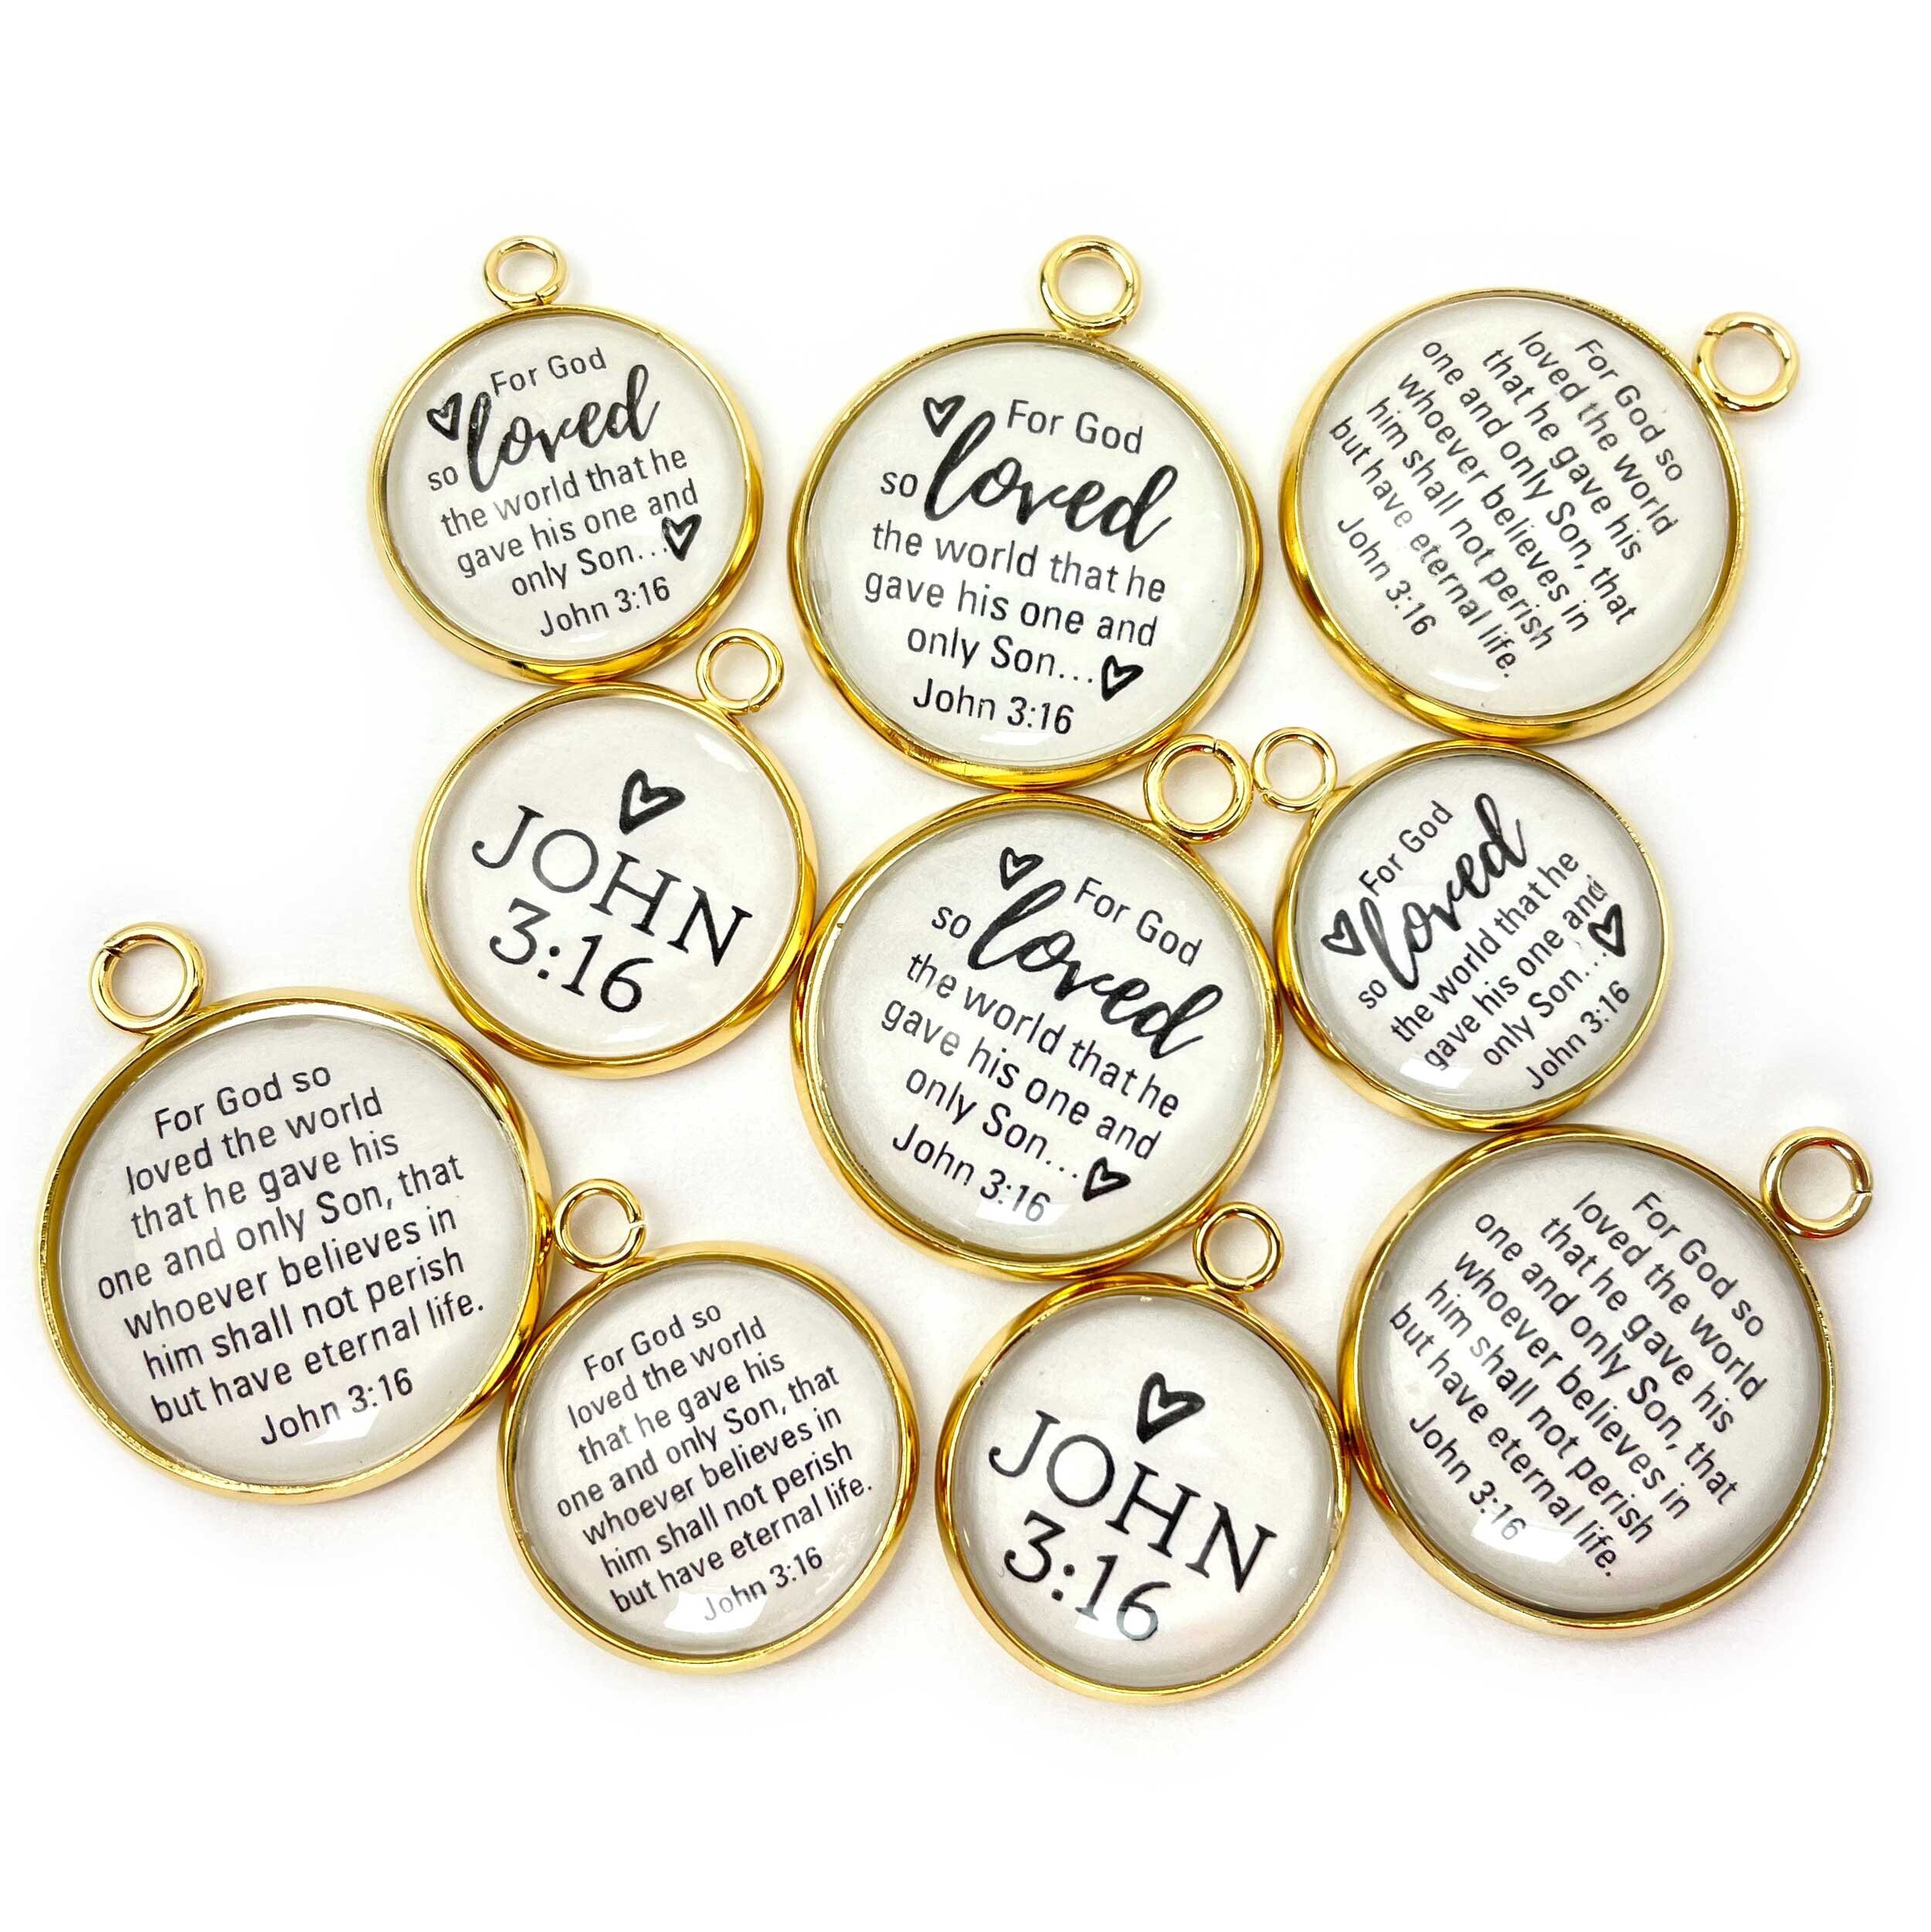 Praise the Lord! Psalms Scripture Bulk Charms for Jewelry Making